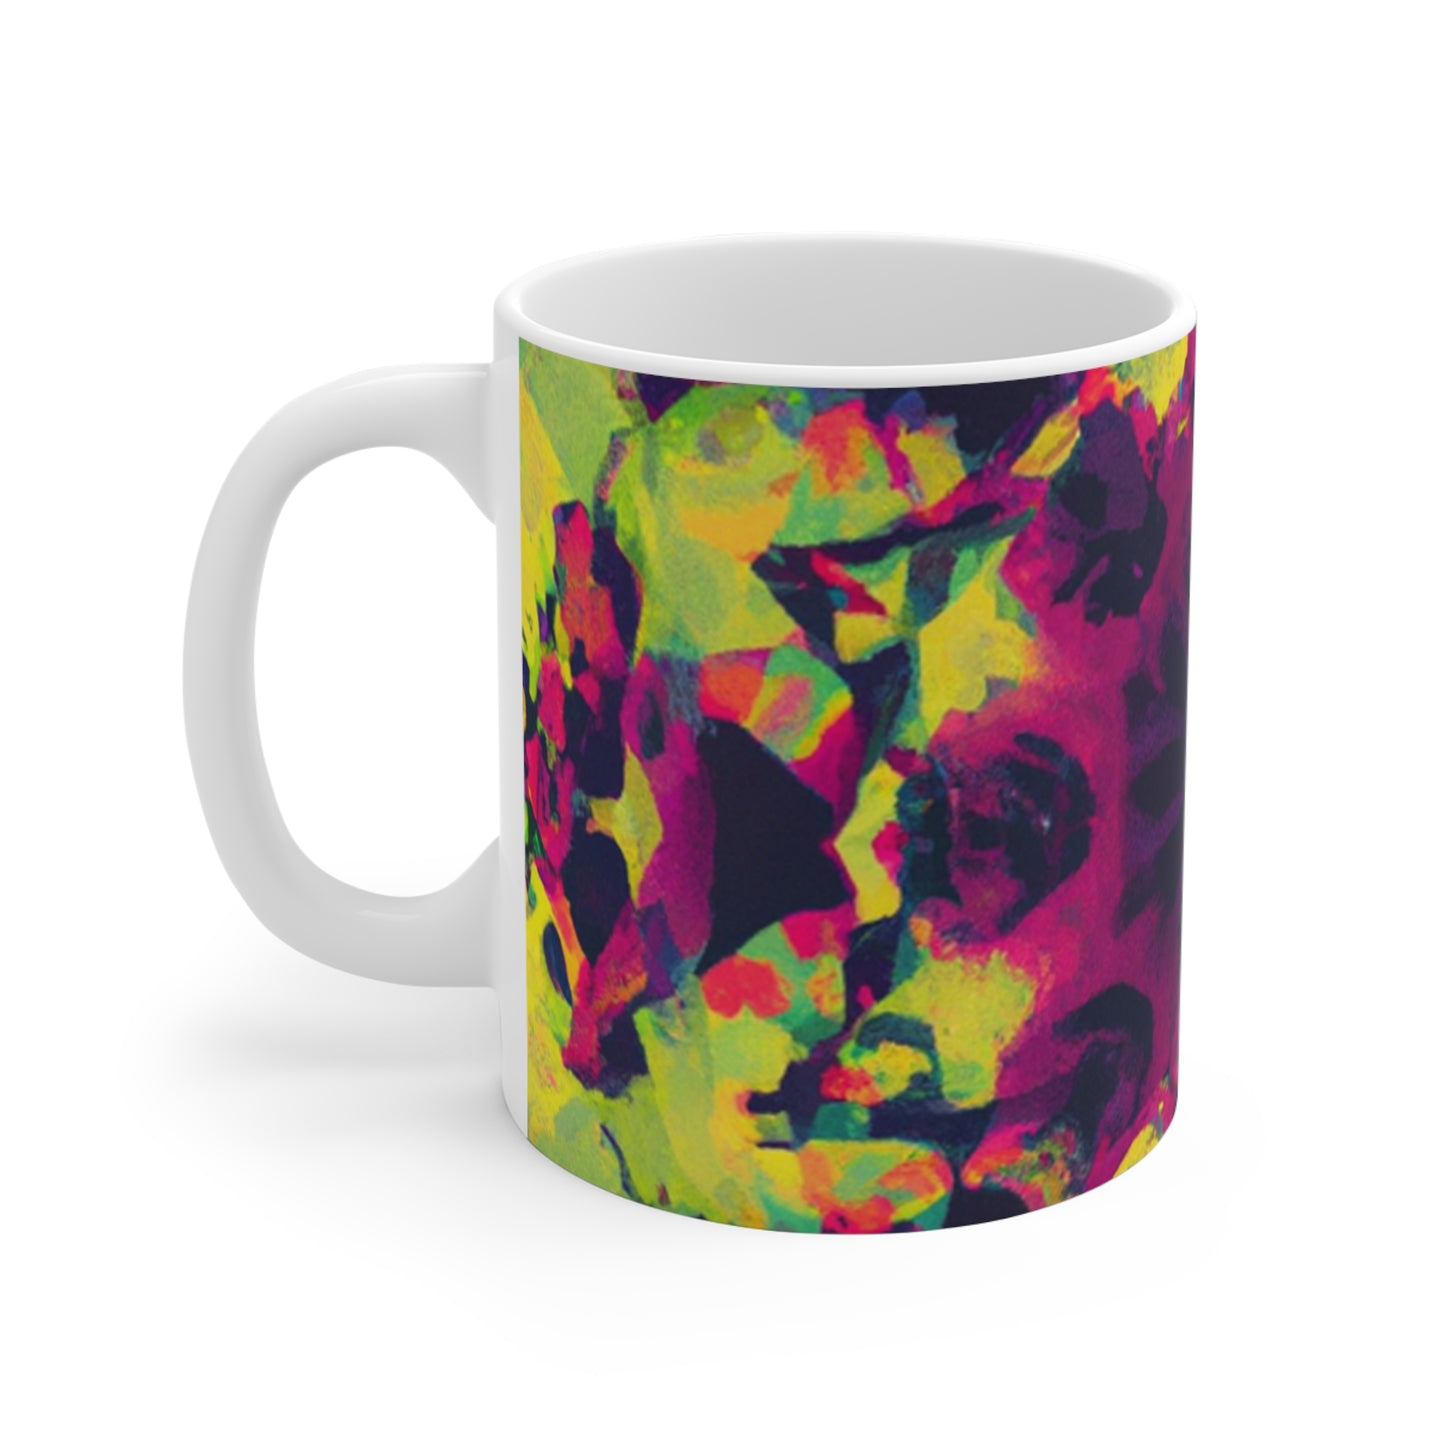 Perky Pete's Coffee - Psychedelic Coffee Cup Mug 11 Ounce